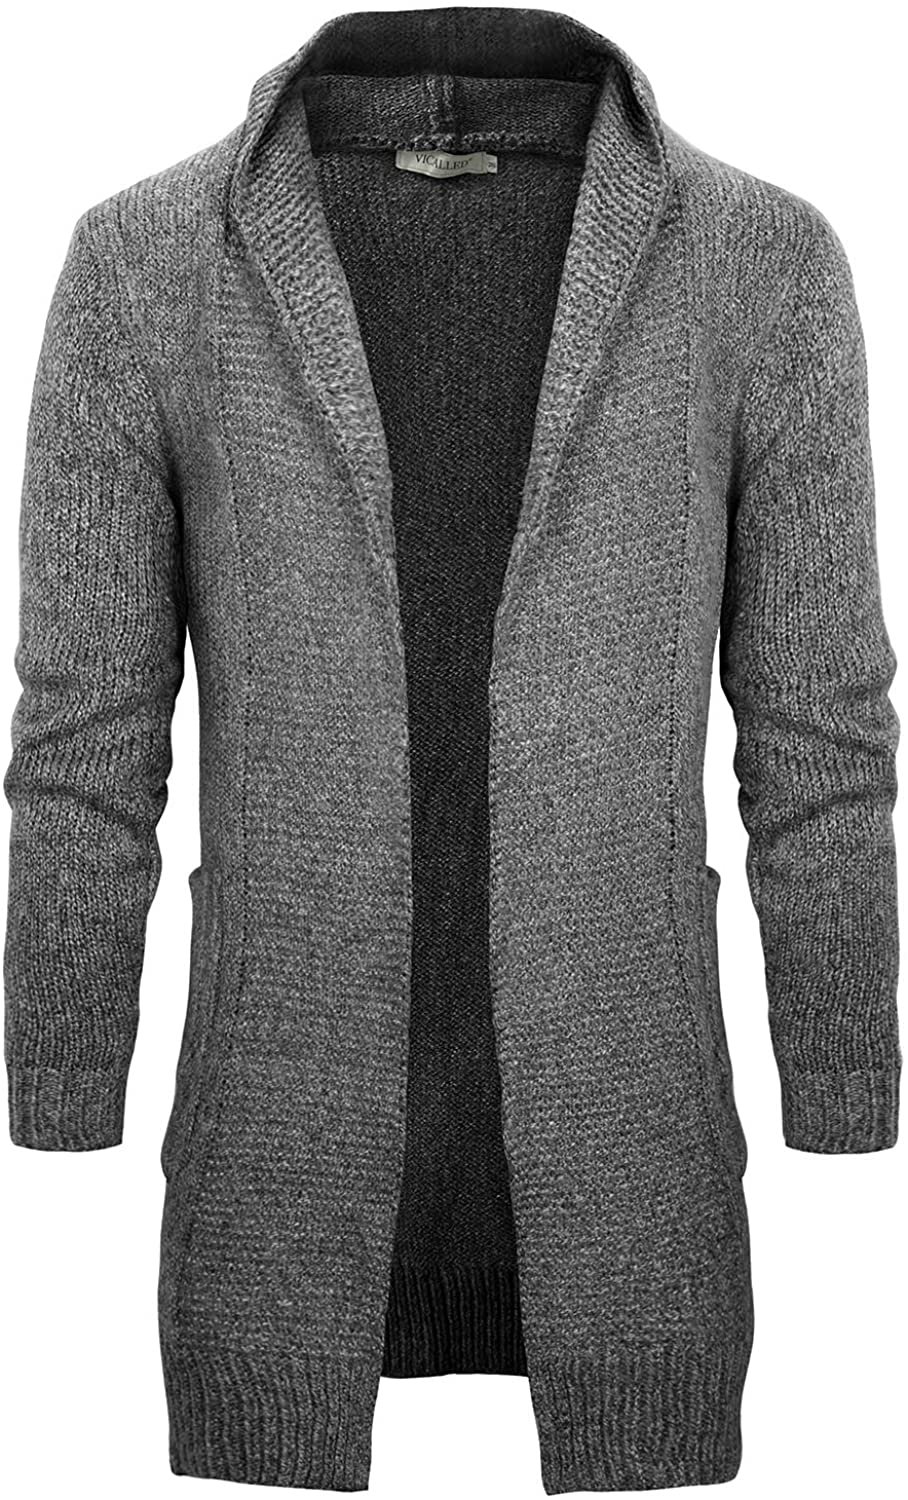 VICALLED Men's Long Cardigan Sweater Hooded Knit Slim Fit Open Front ...